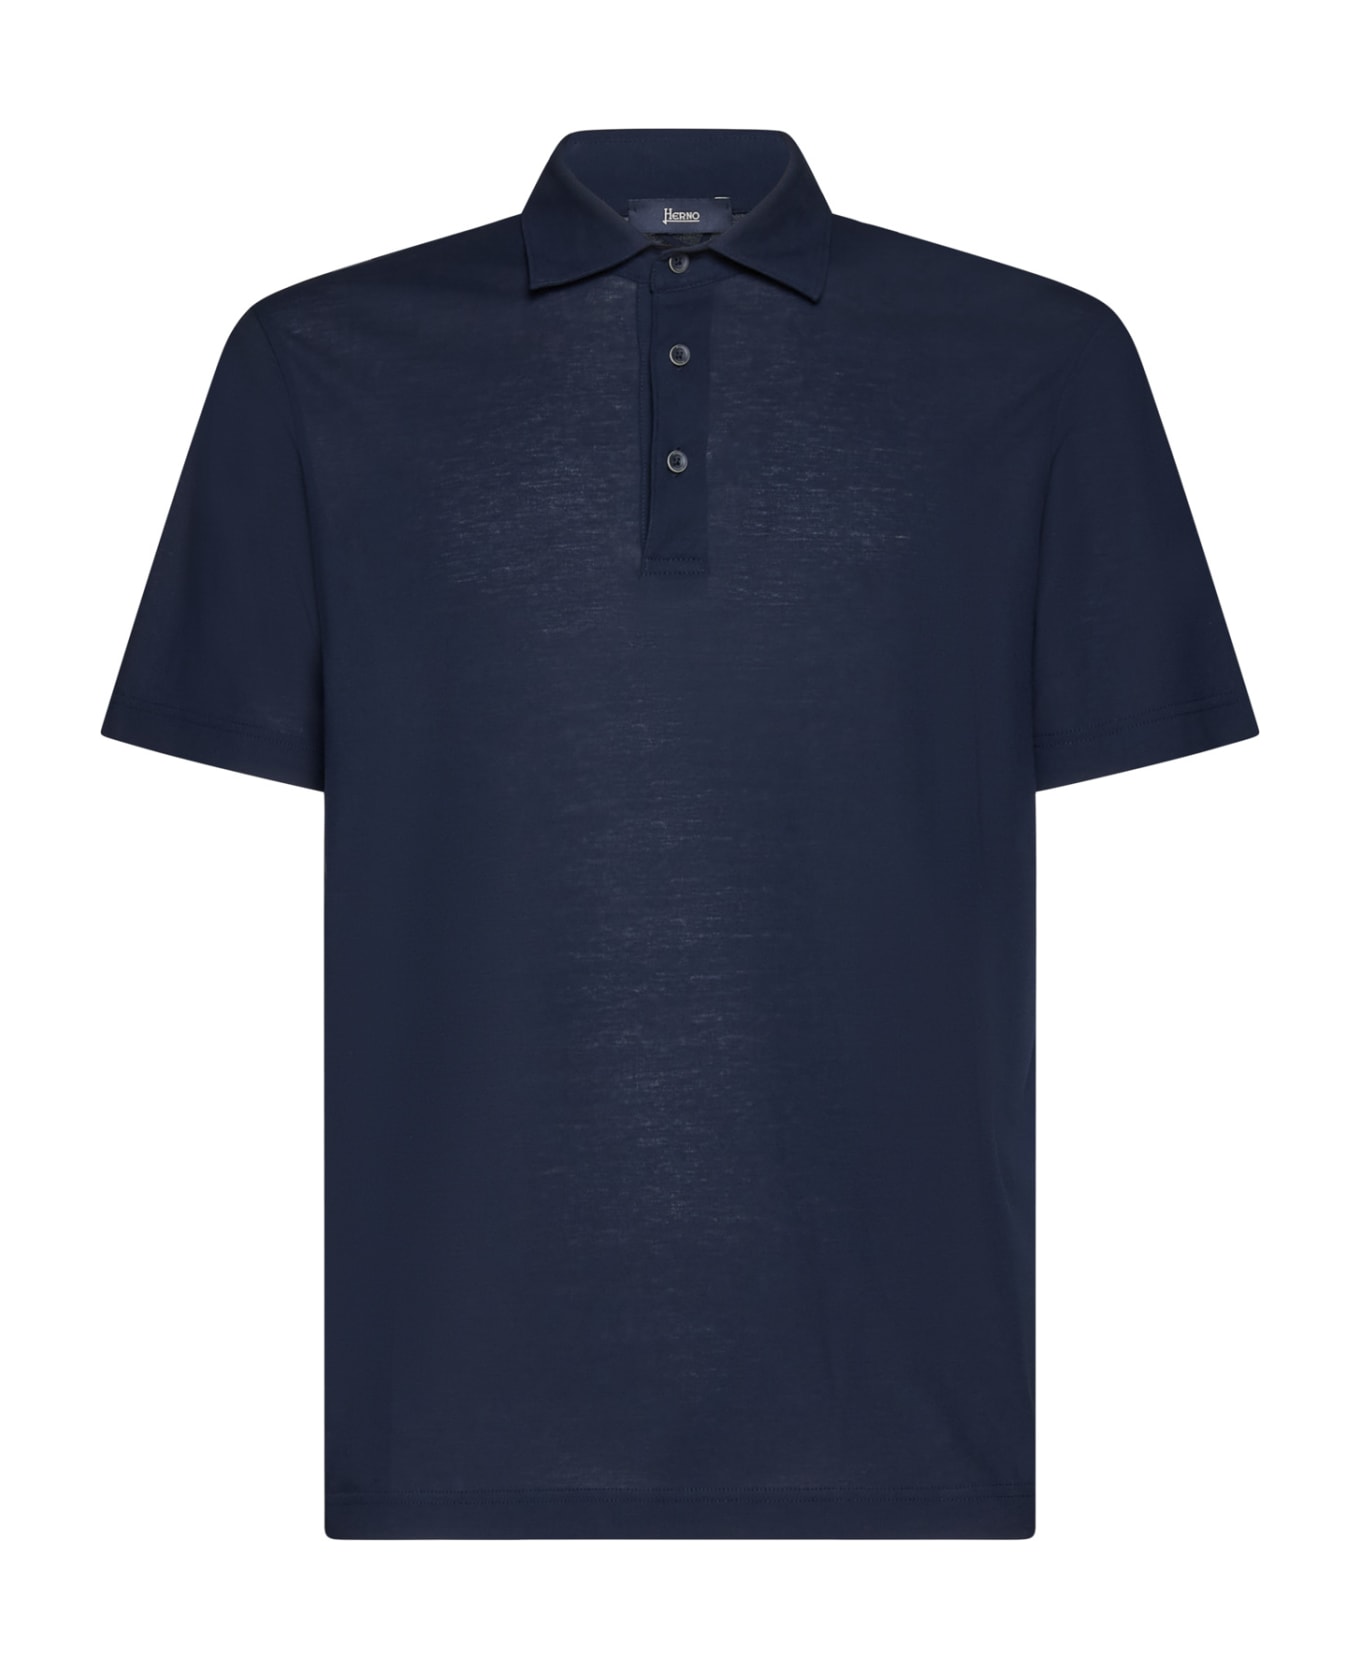 Herno Cotton Jersey Polo Shirt - blue ポロシャツ